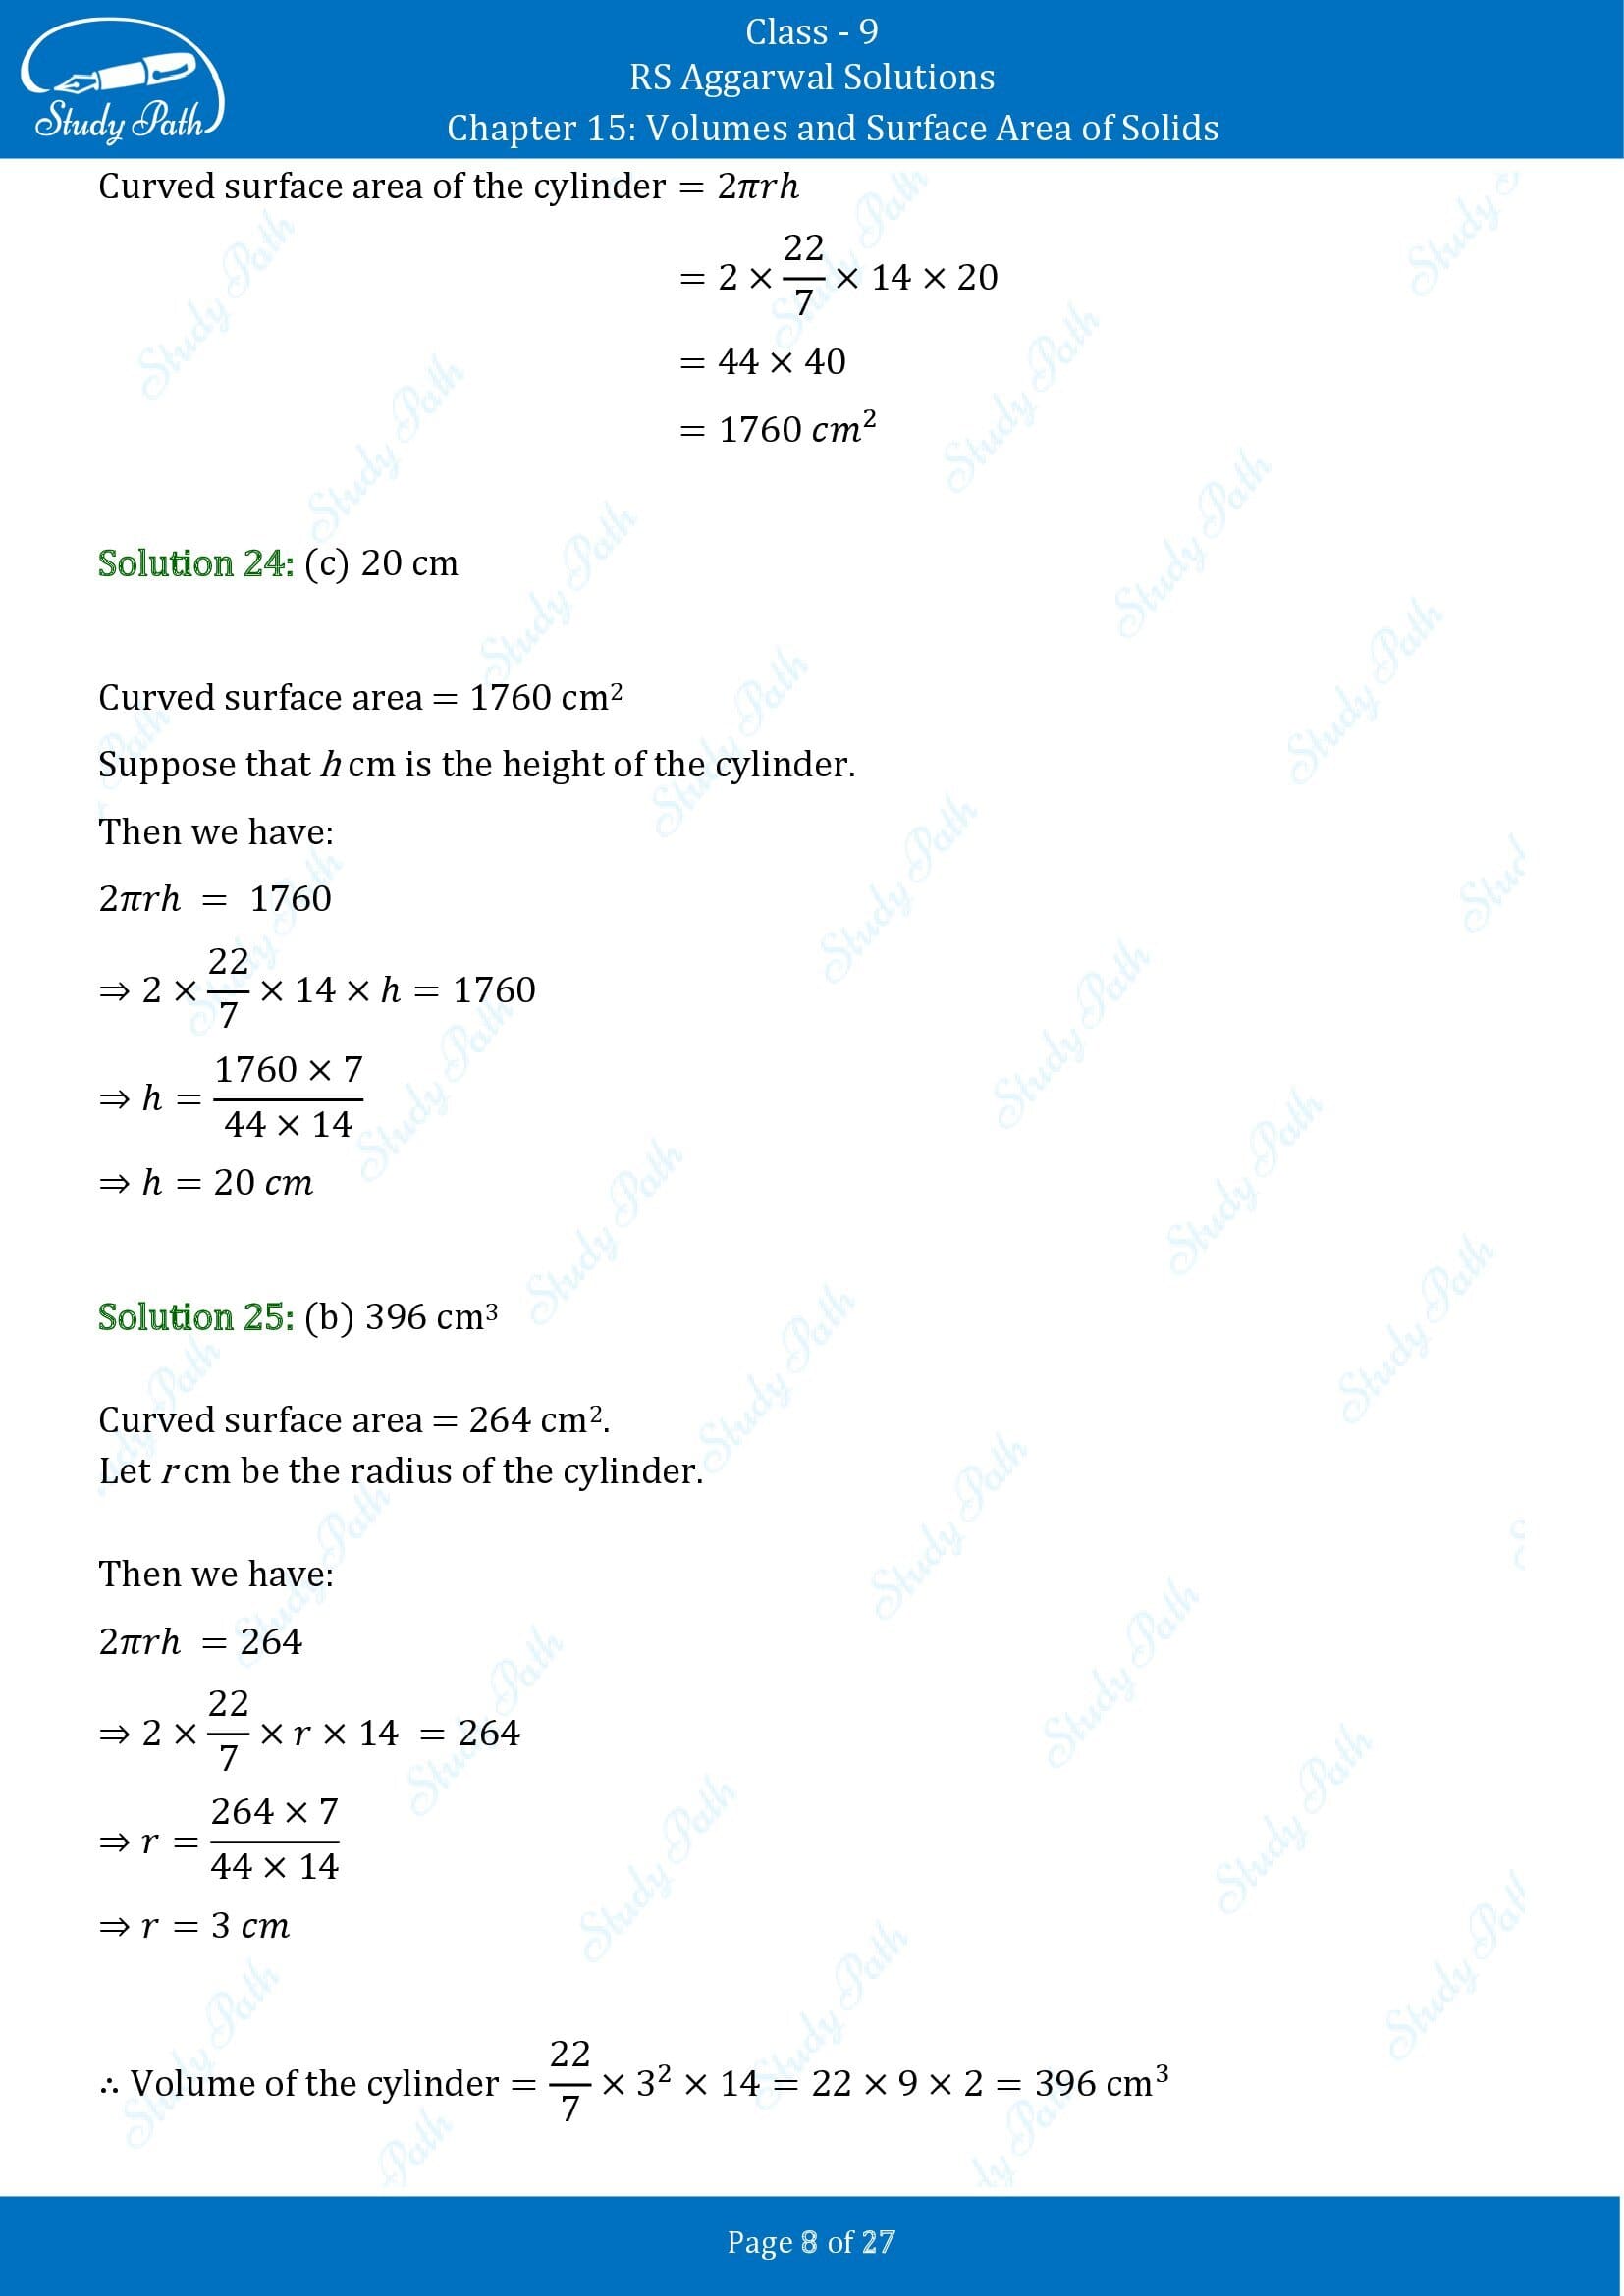 RS Aggarwal Solutions Class 9 Chapter 15 Volumes and Surface Area of Solids Multiple Choice Questions MCQs 00008